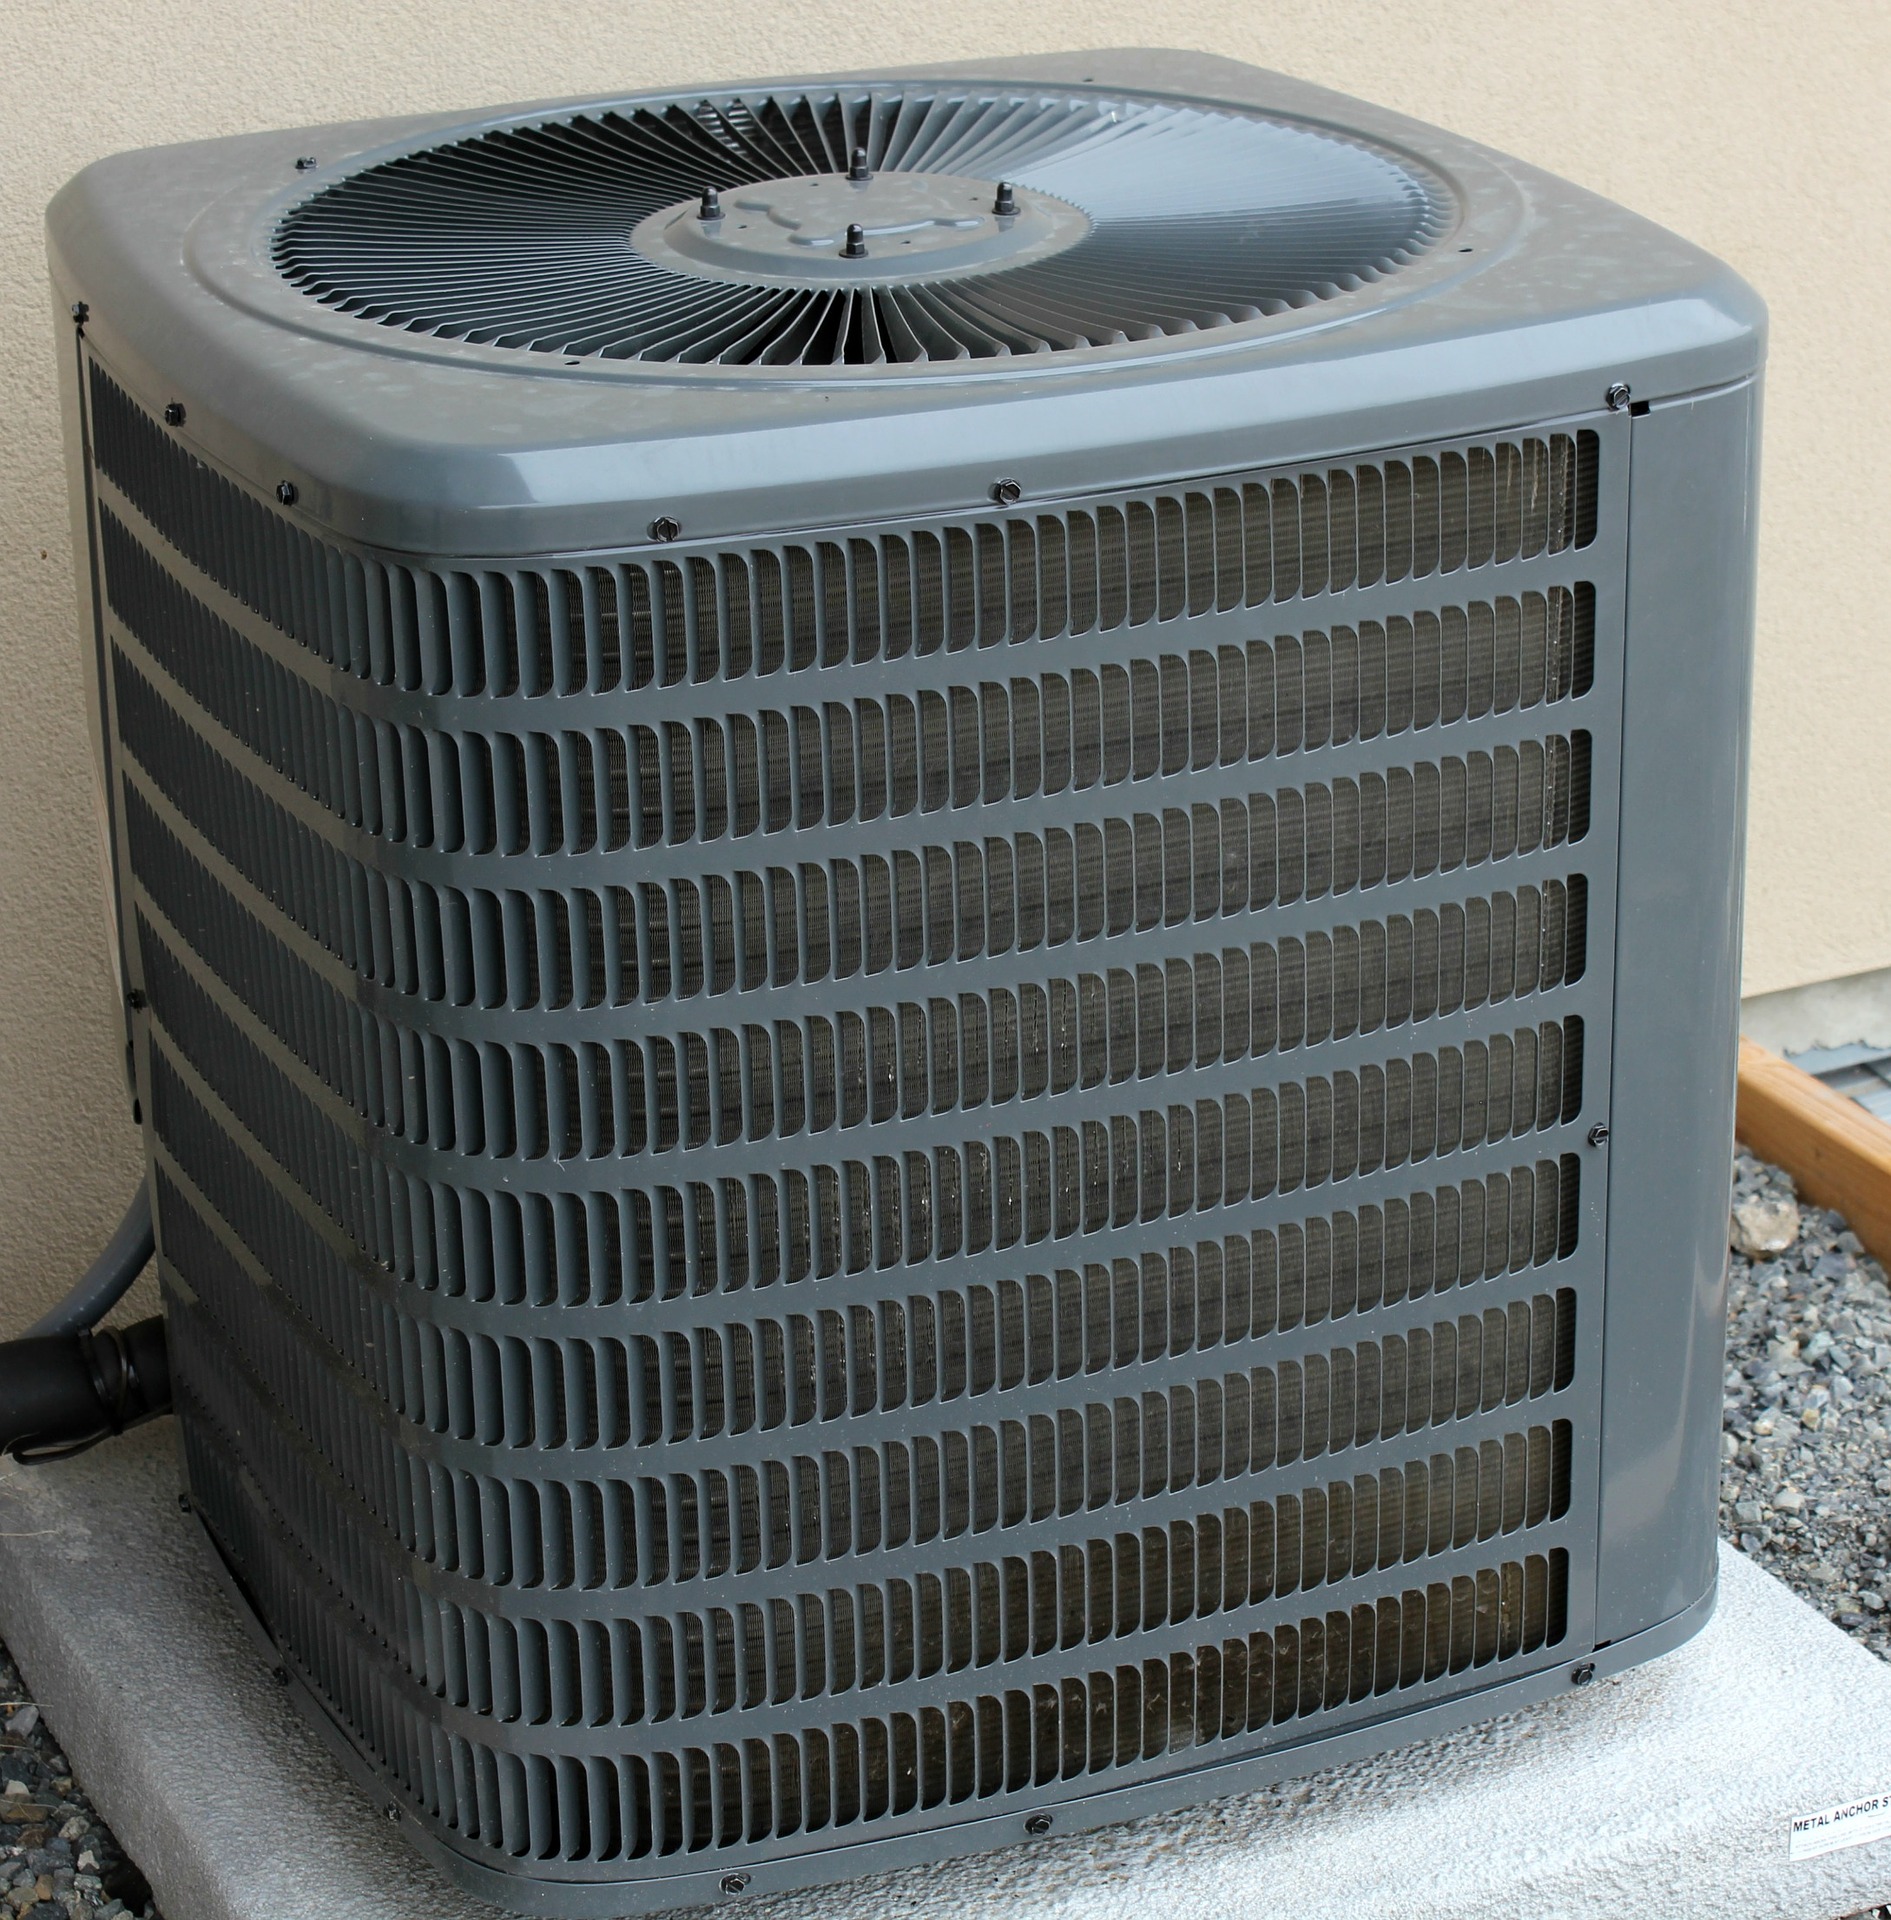 Top Air Conditioner Brands